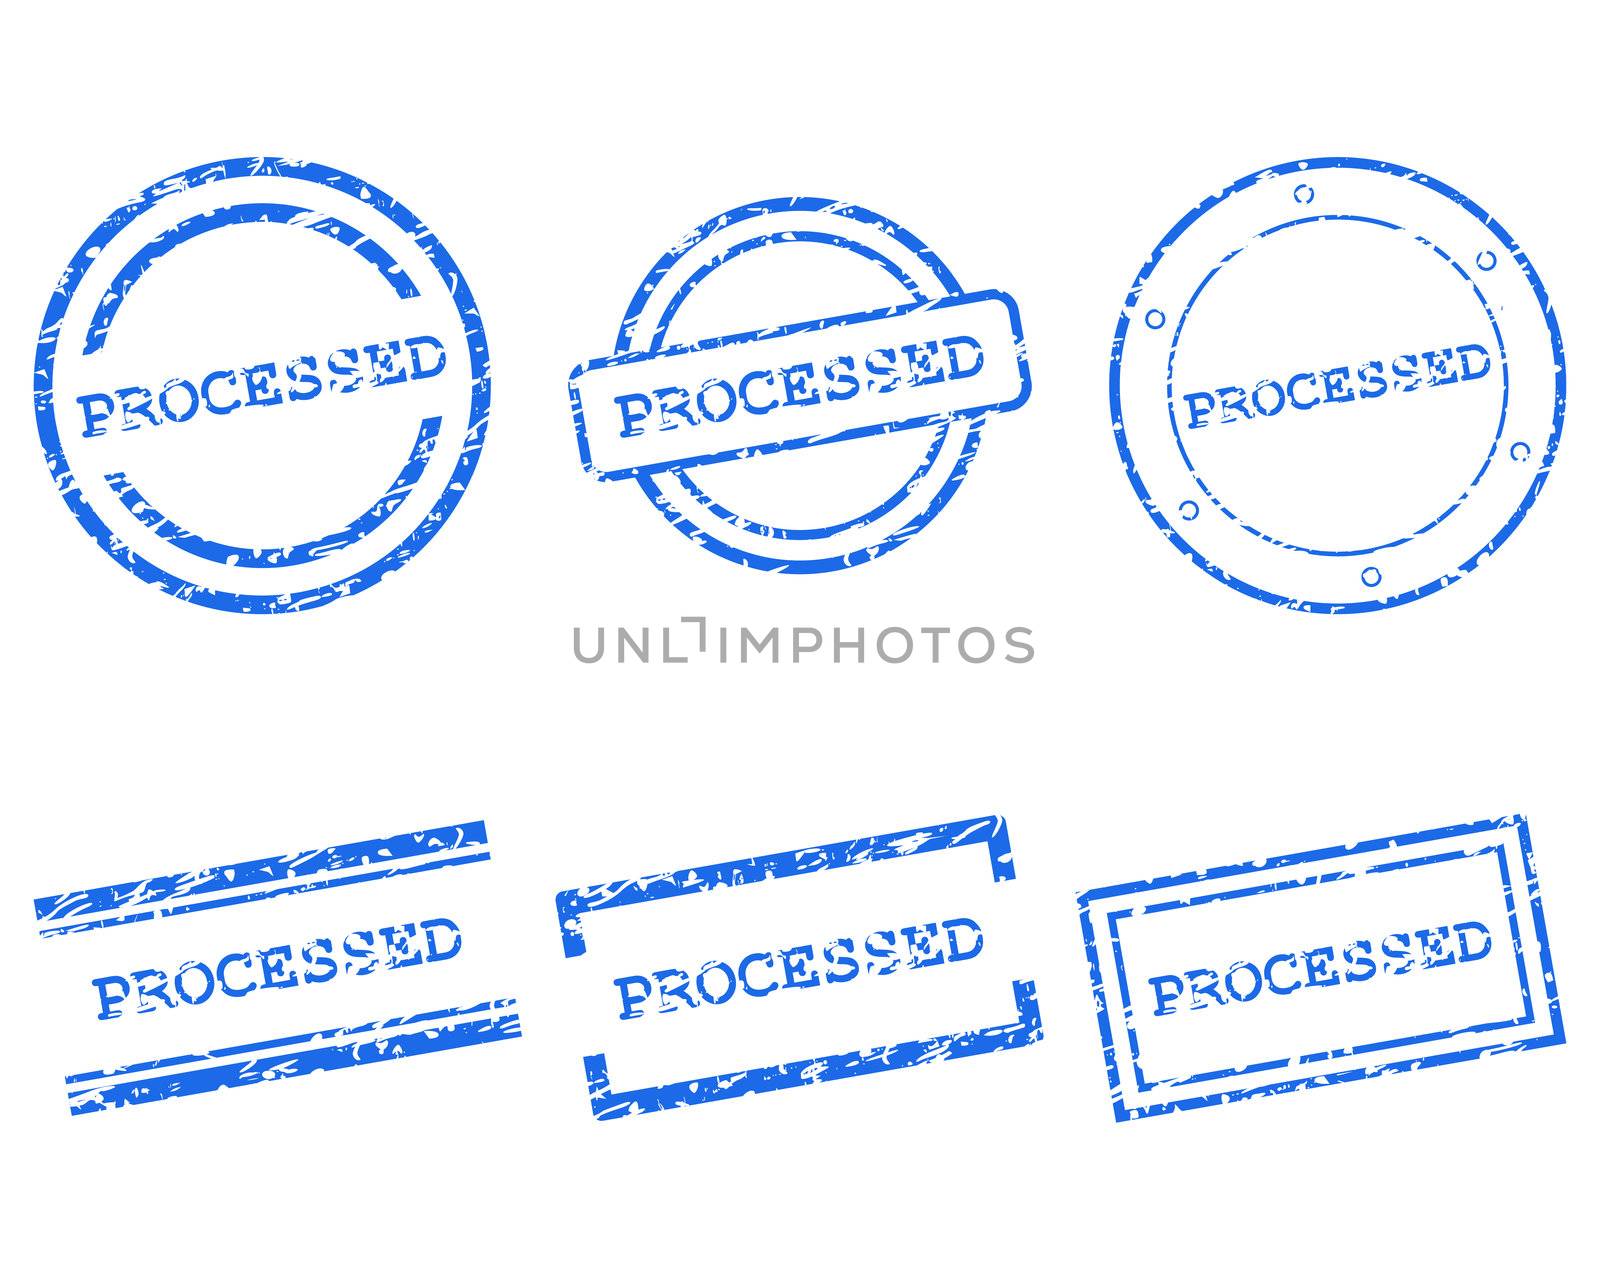 Processed stamps